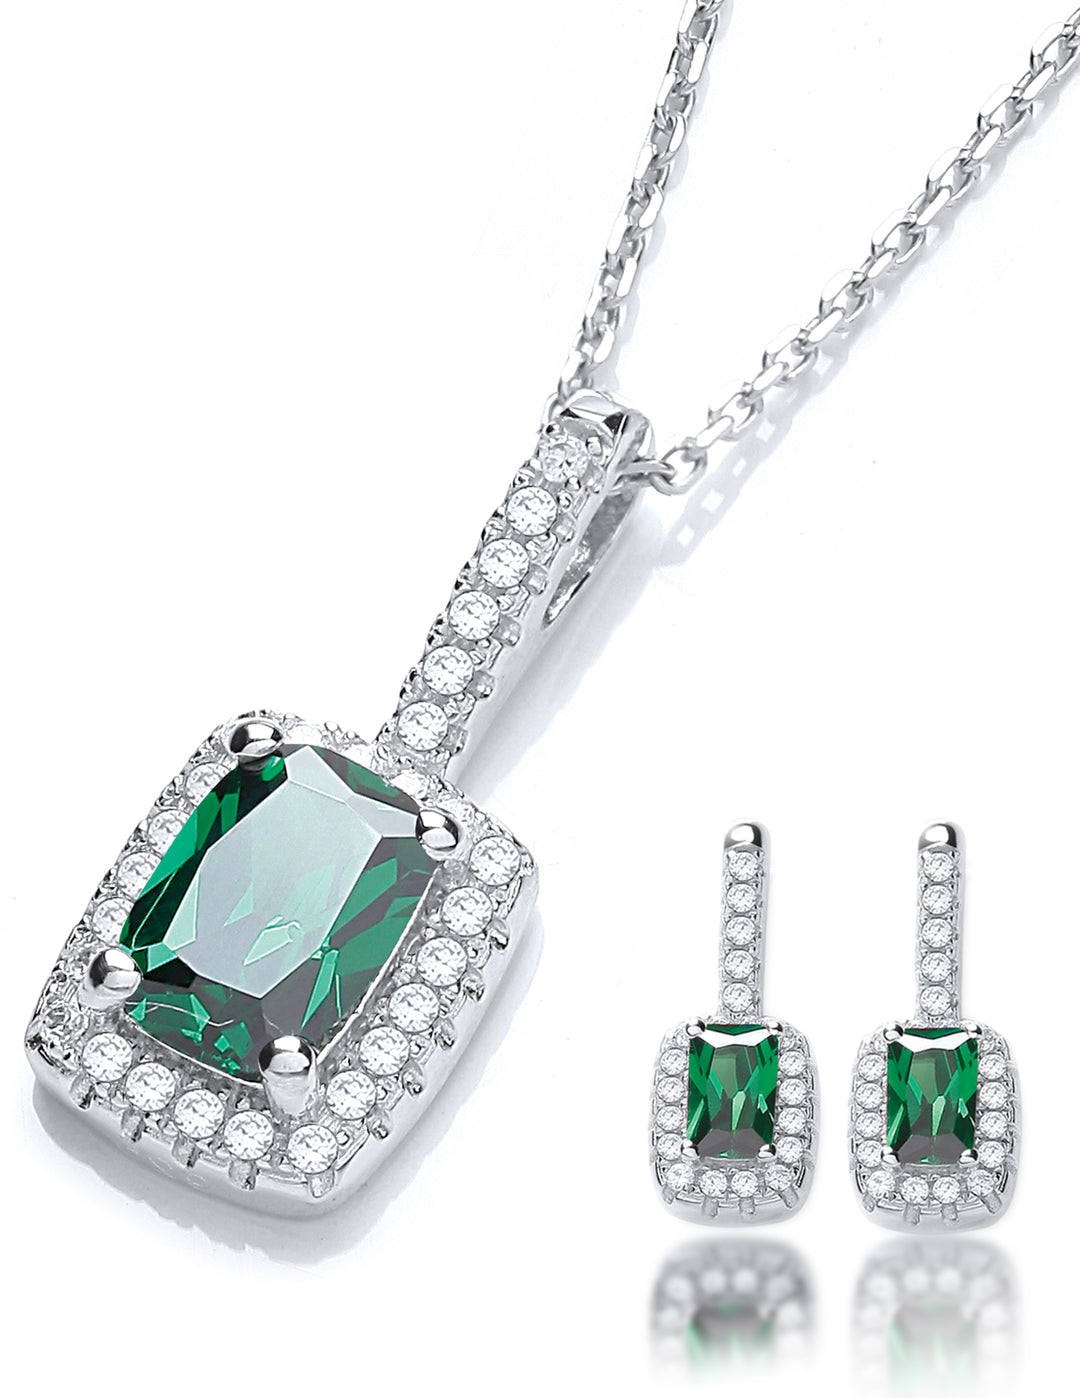 Green pendant emerald necklace best for gifts for her